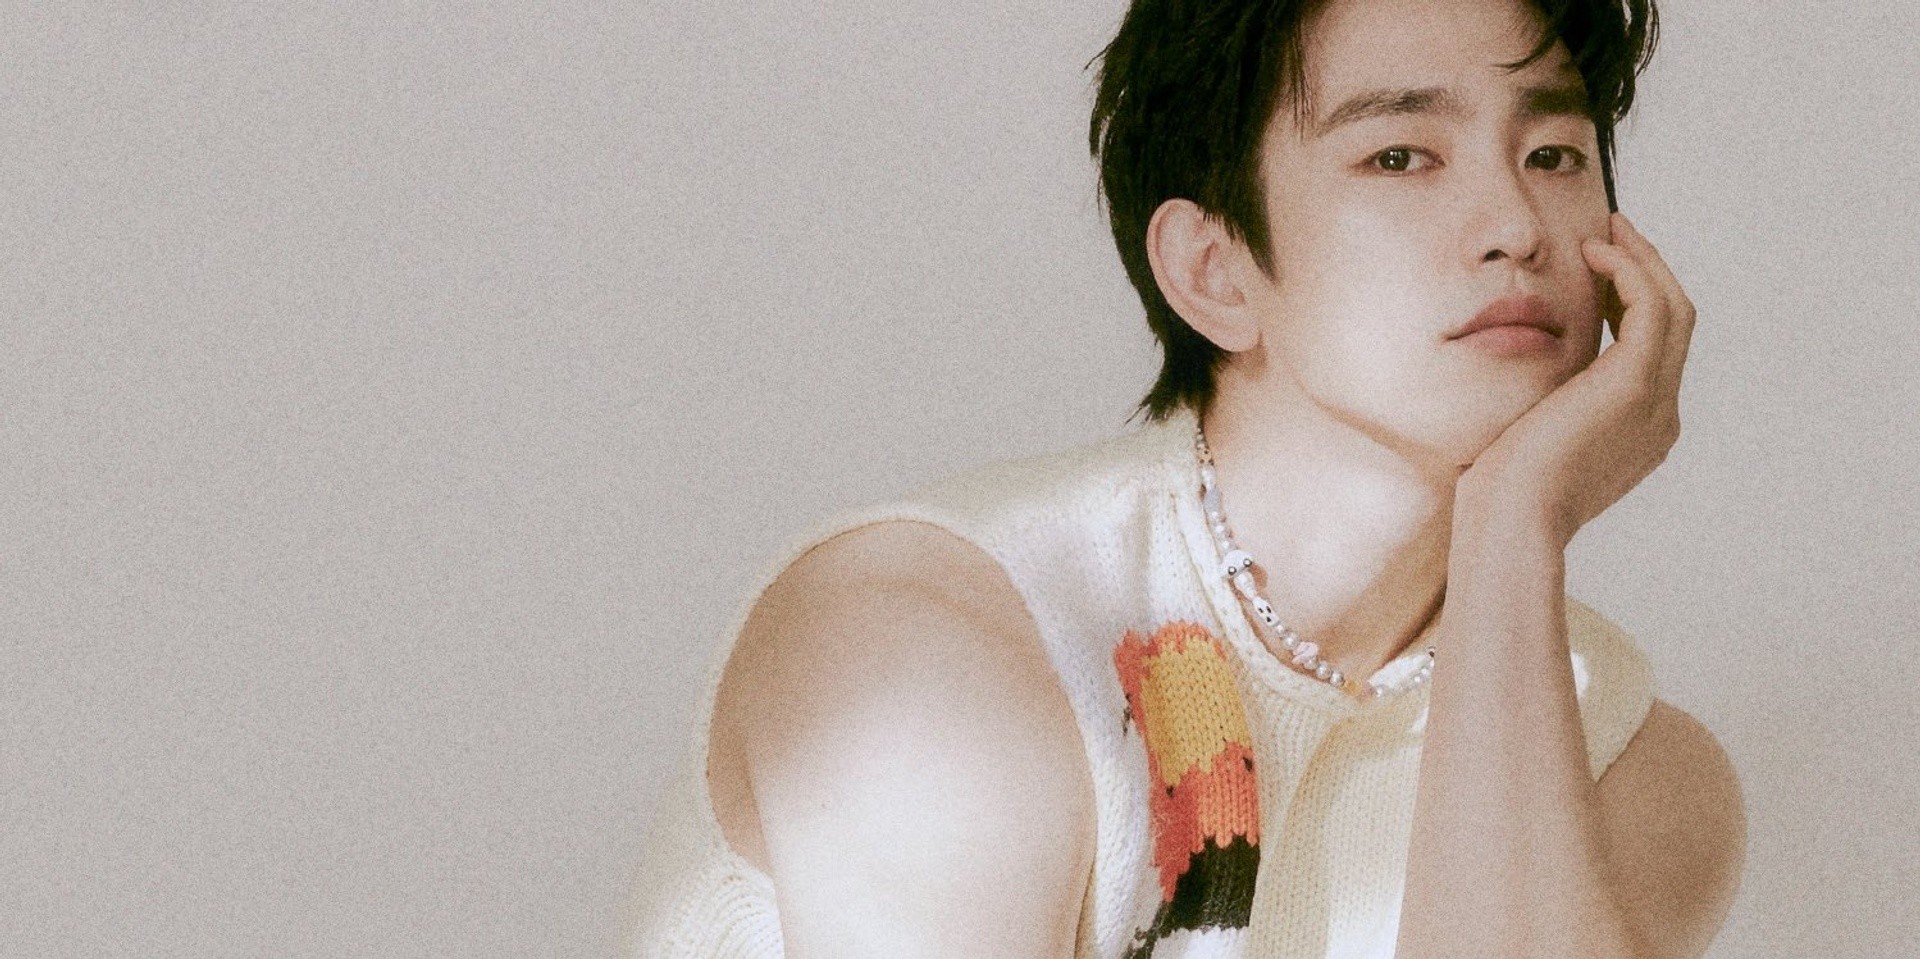 GOT7's JINYOUNG to release first solo album, 'Chapter 0: WITH'